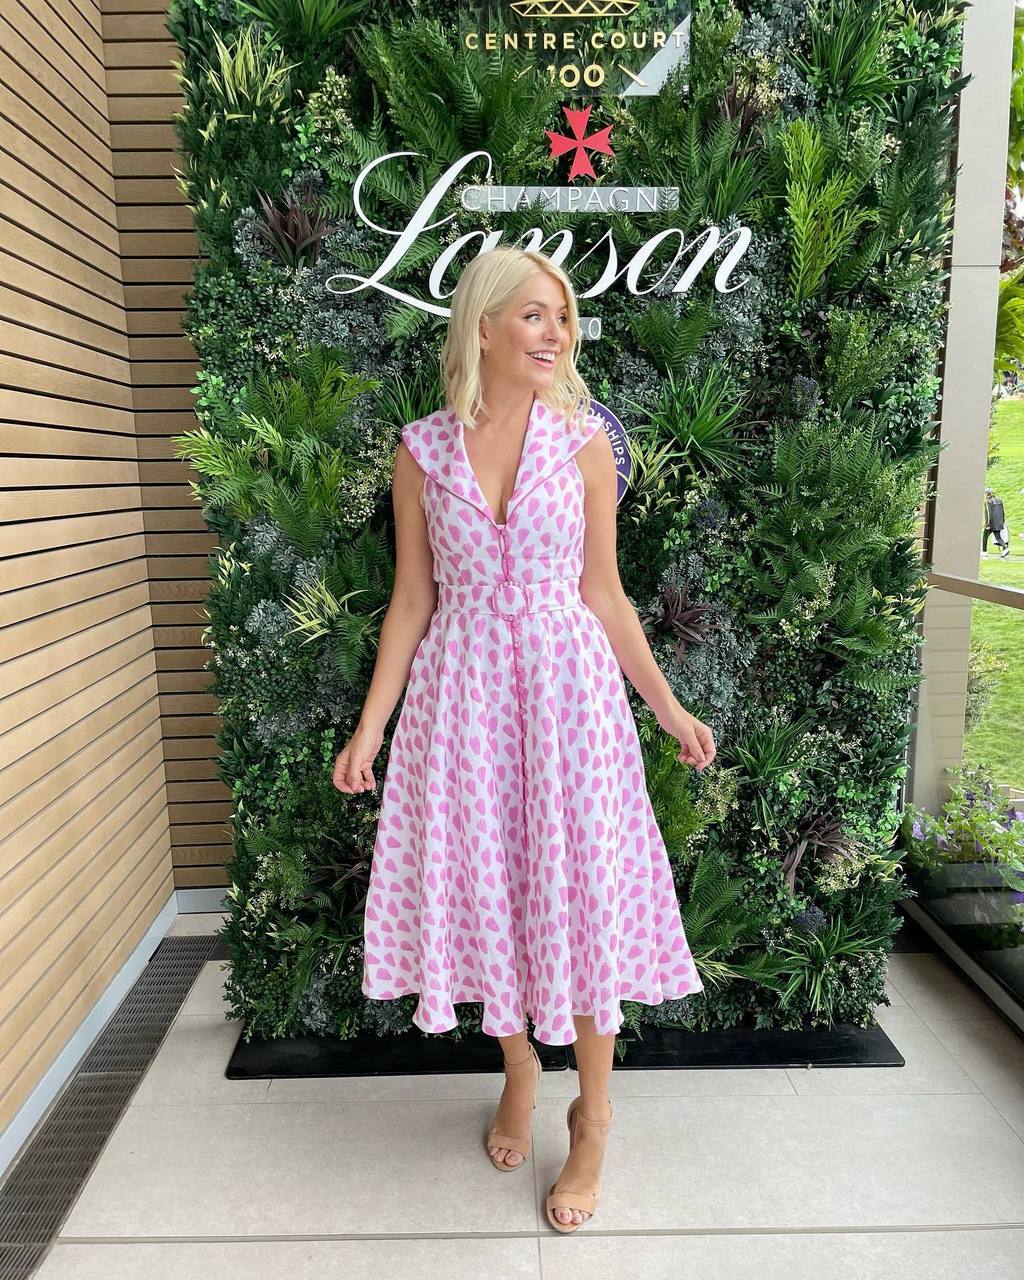 Holly Willoughby Feet